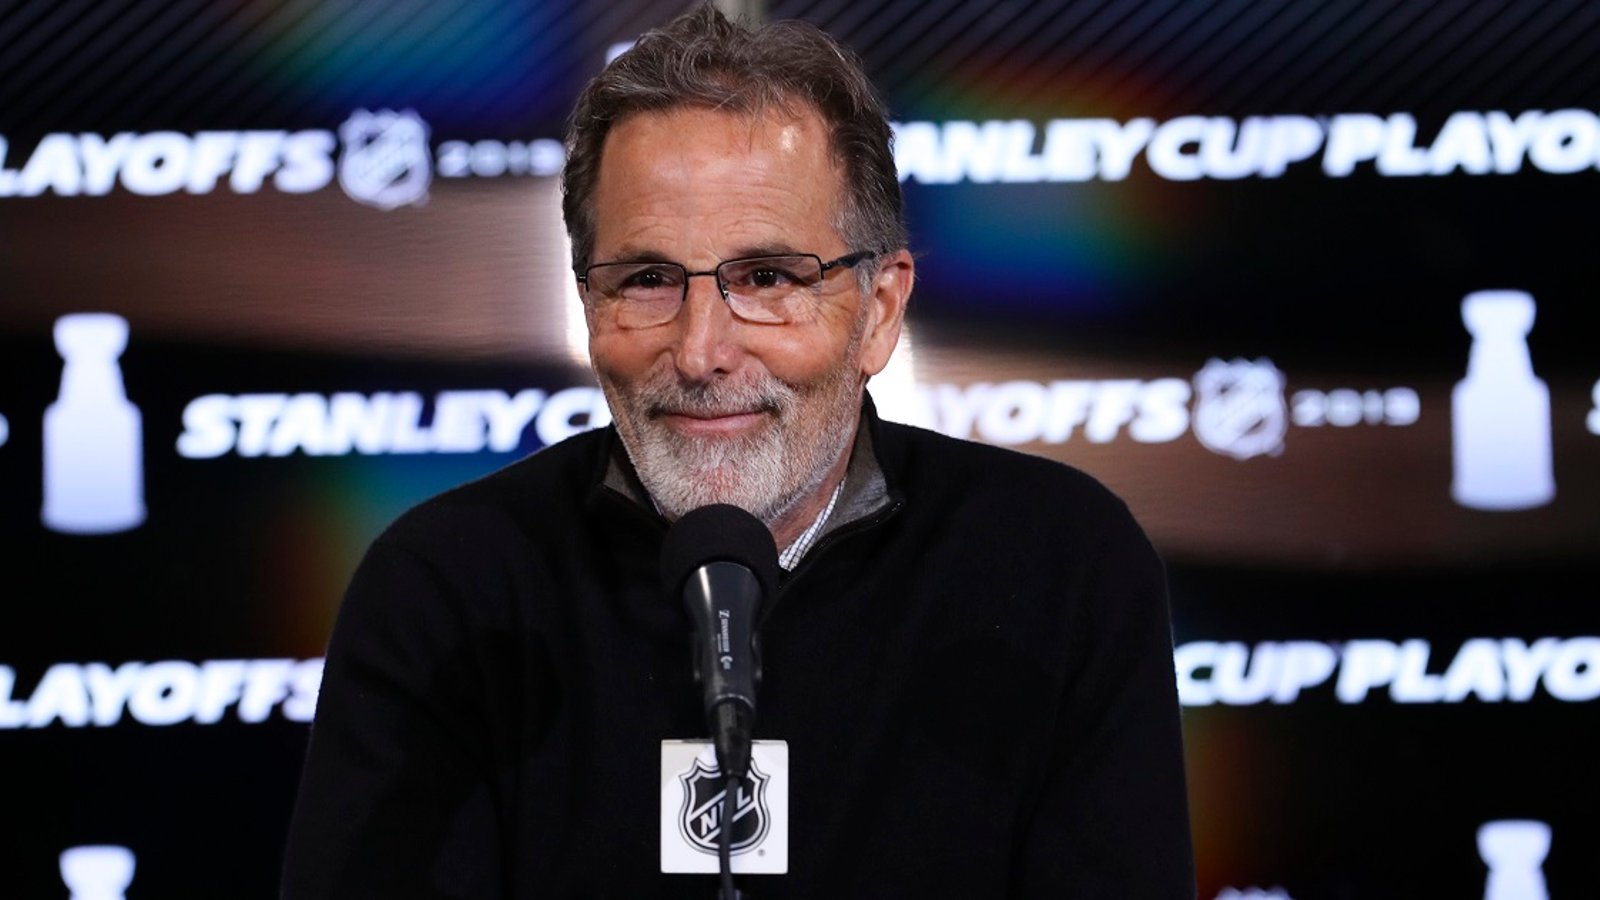 John Tortorella makes an unexpected change to his lineup against the Leafs.